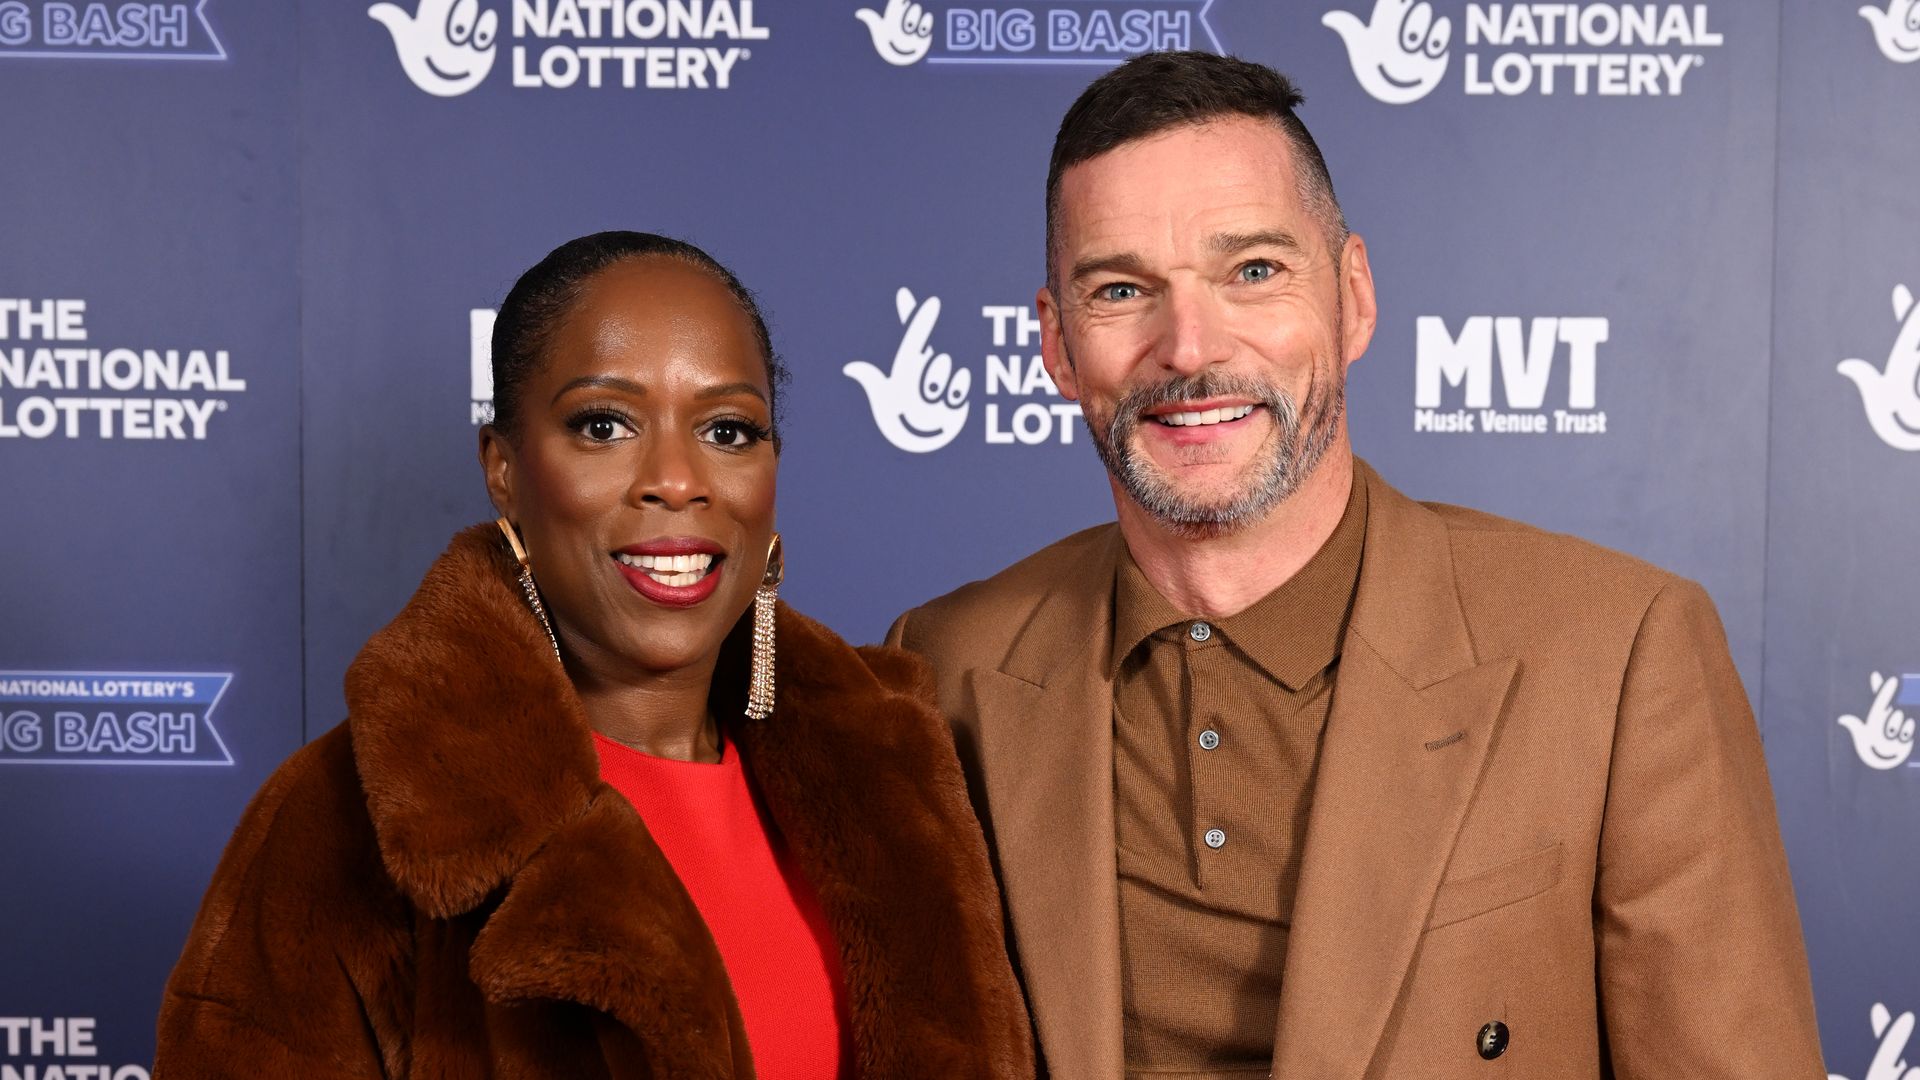 Fruitcake and Fred Sirieix attend The National Lottery's Big Bash to celebrate 2022's entertainment packed year at OVO Arena Wembley on December 06, 2022 in London, England.